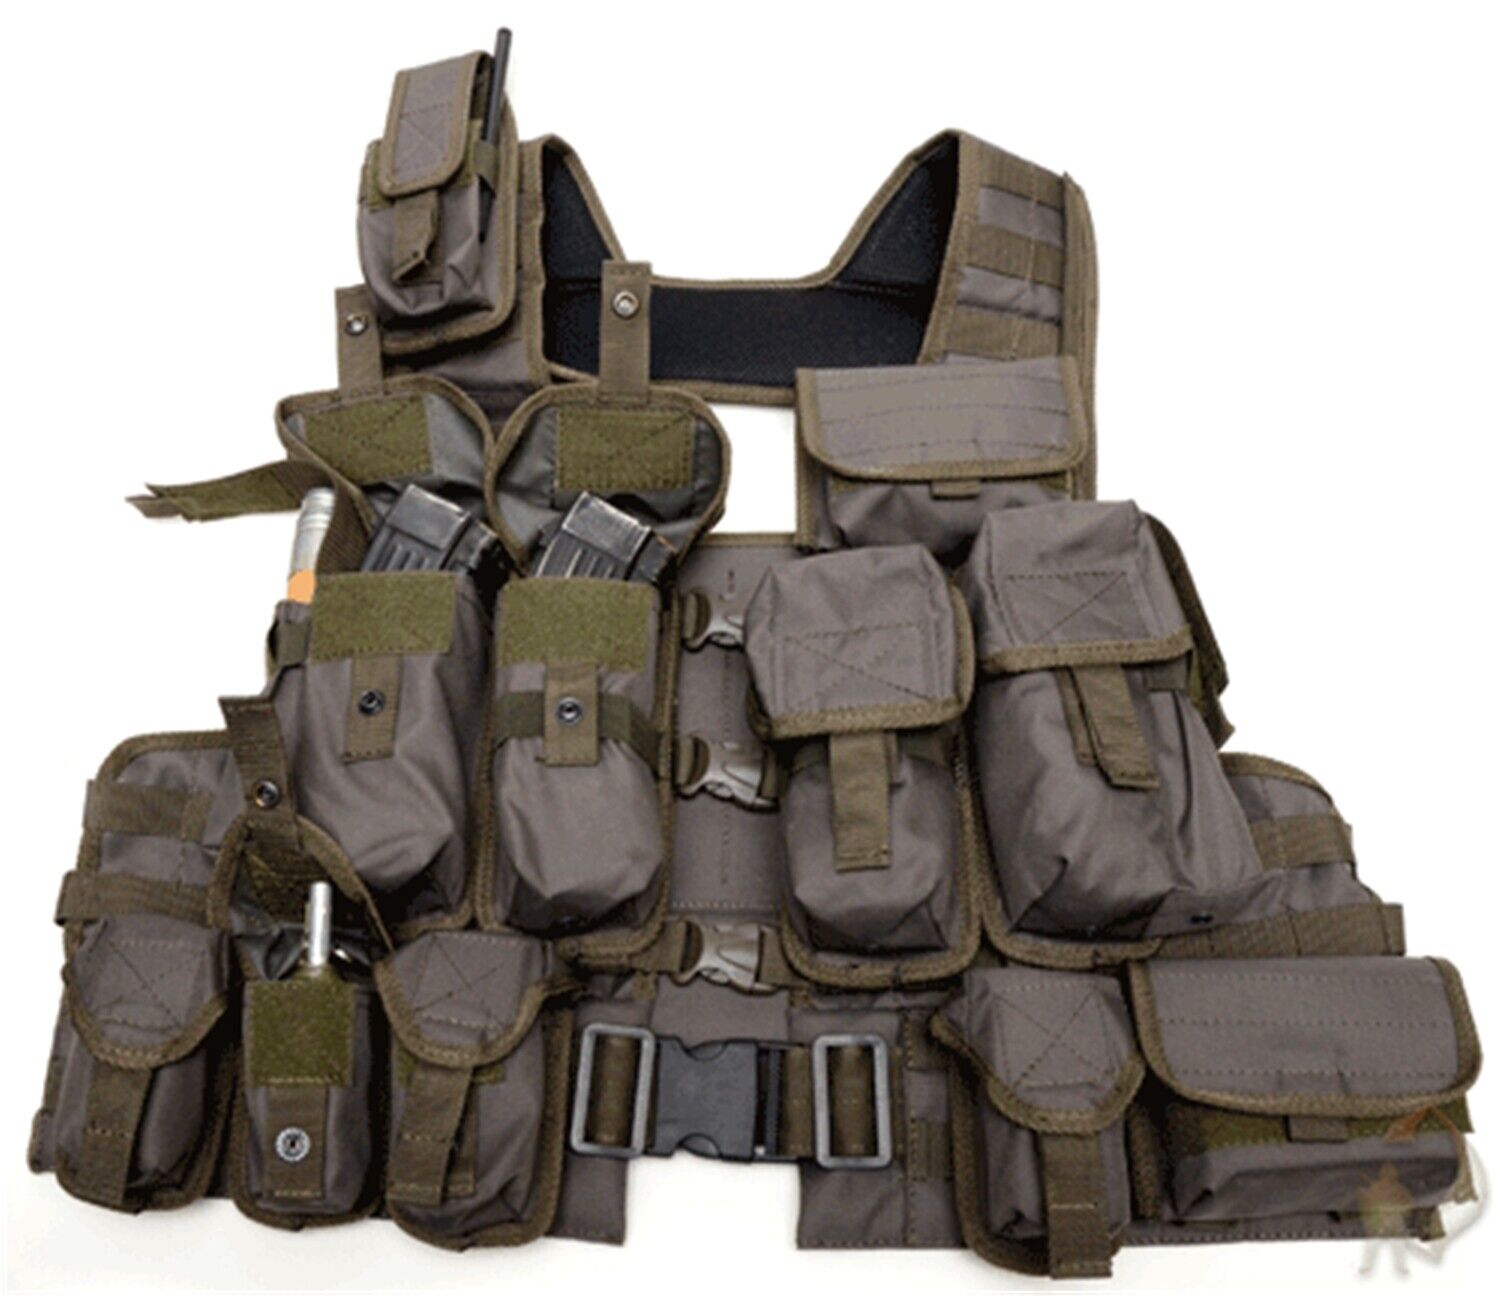 Russian Military Tactical Vest GRANIT Operator Modular MOLLE Olive Set by Sotnic